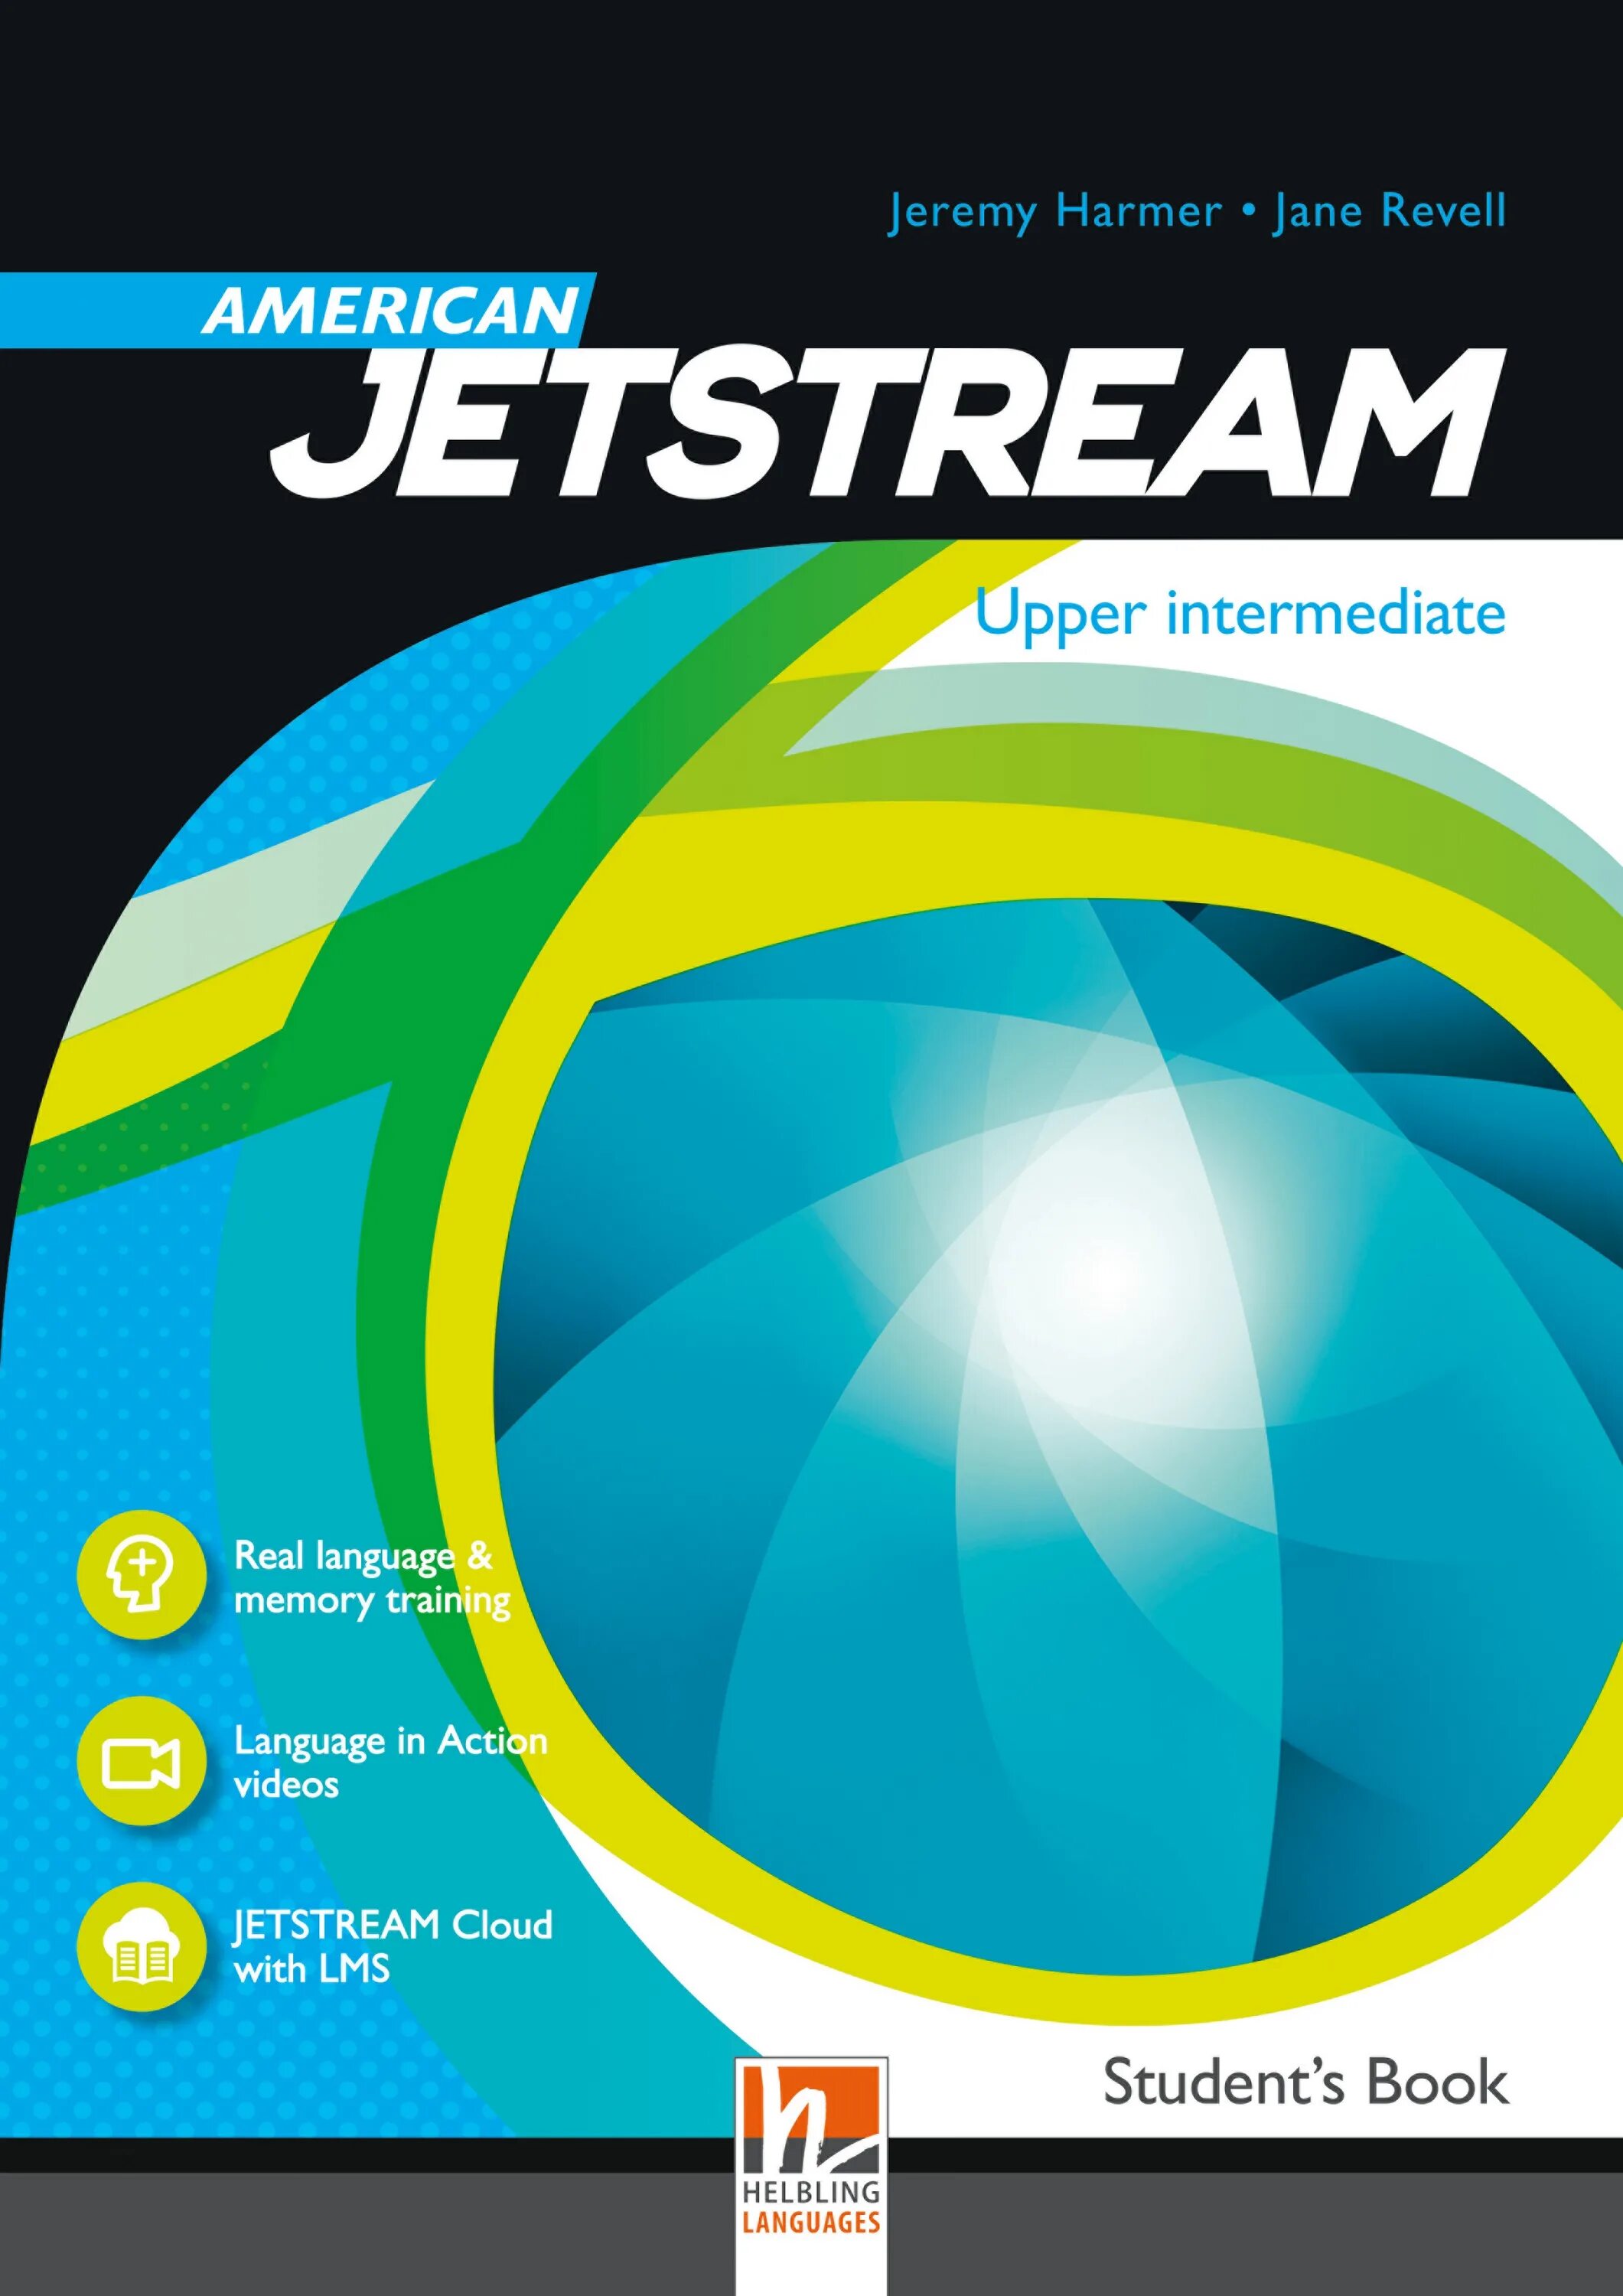 Jetstream students book. Perspectives pre-Intermediate student's book. Intermediate student's book. Perspectives Intermediate student's book. More student's book